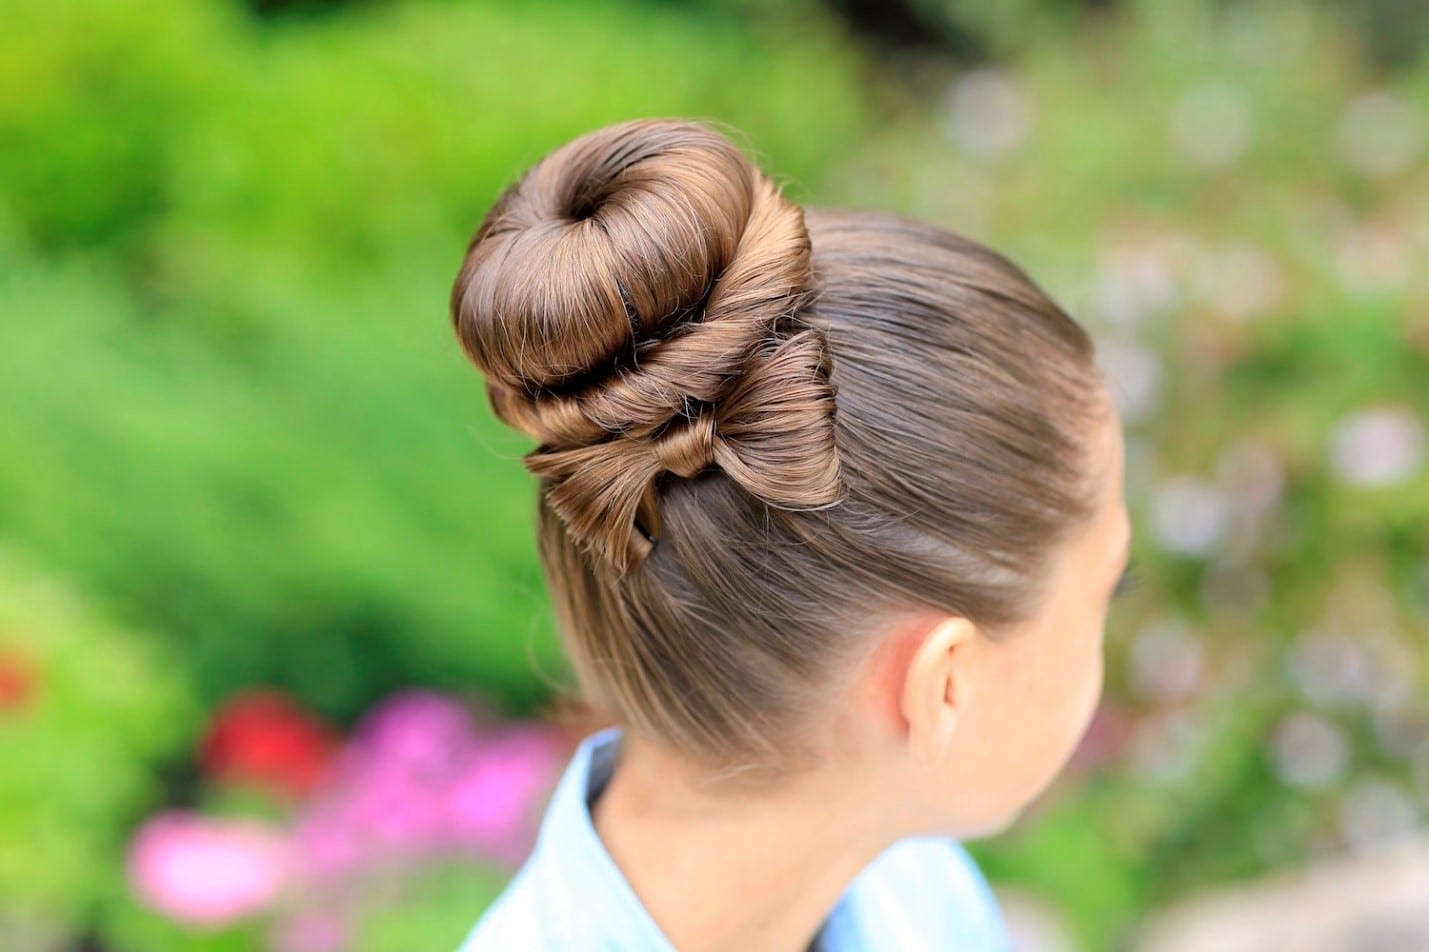 Cute Girl Hairstyles Buns
 Best Hairdo Ideas for Busy Young Women Stylendesigns